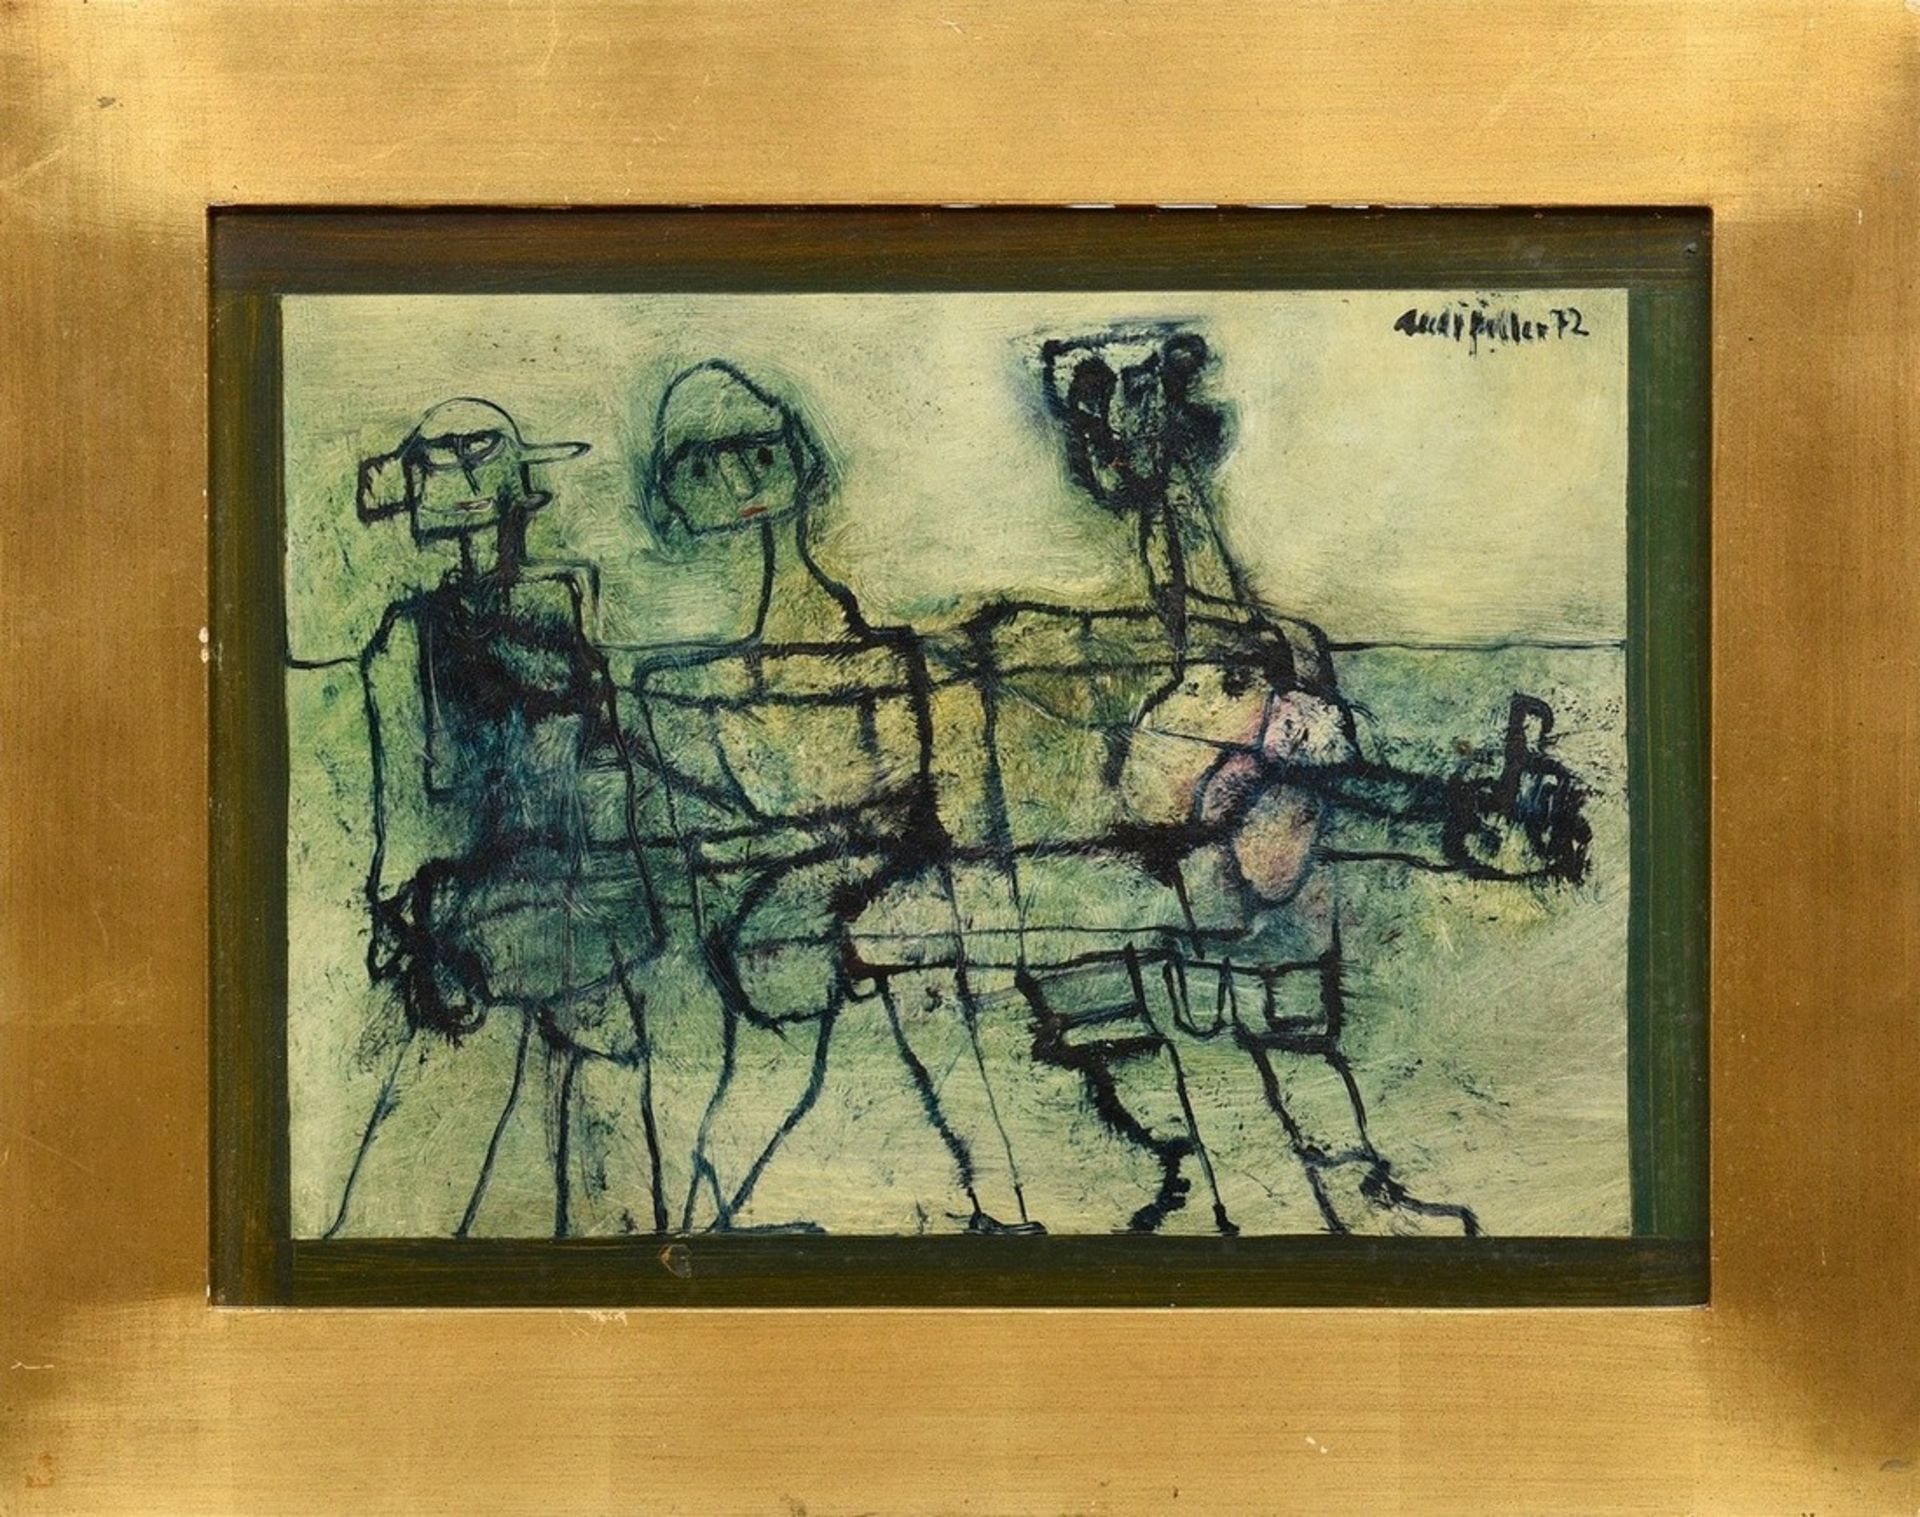 Fiedler, Arnold (1900-1985) "Three Figures in Green" 1972, oil/plate, upper right signed/date, 45x6 - Image 2 of 4